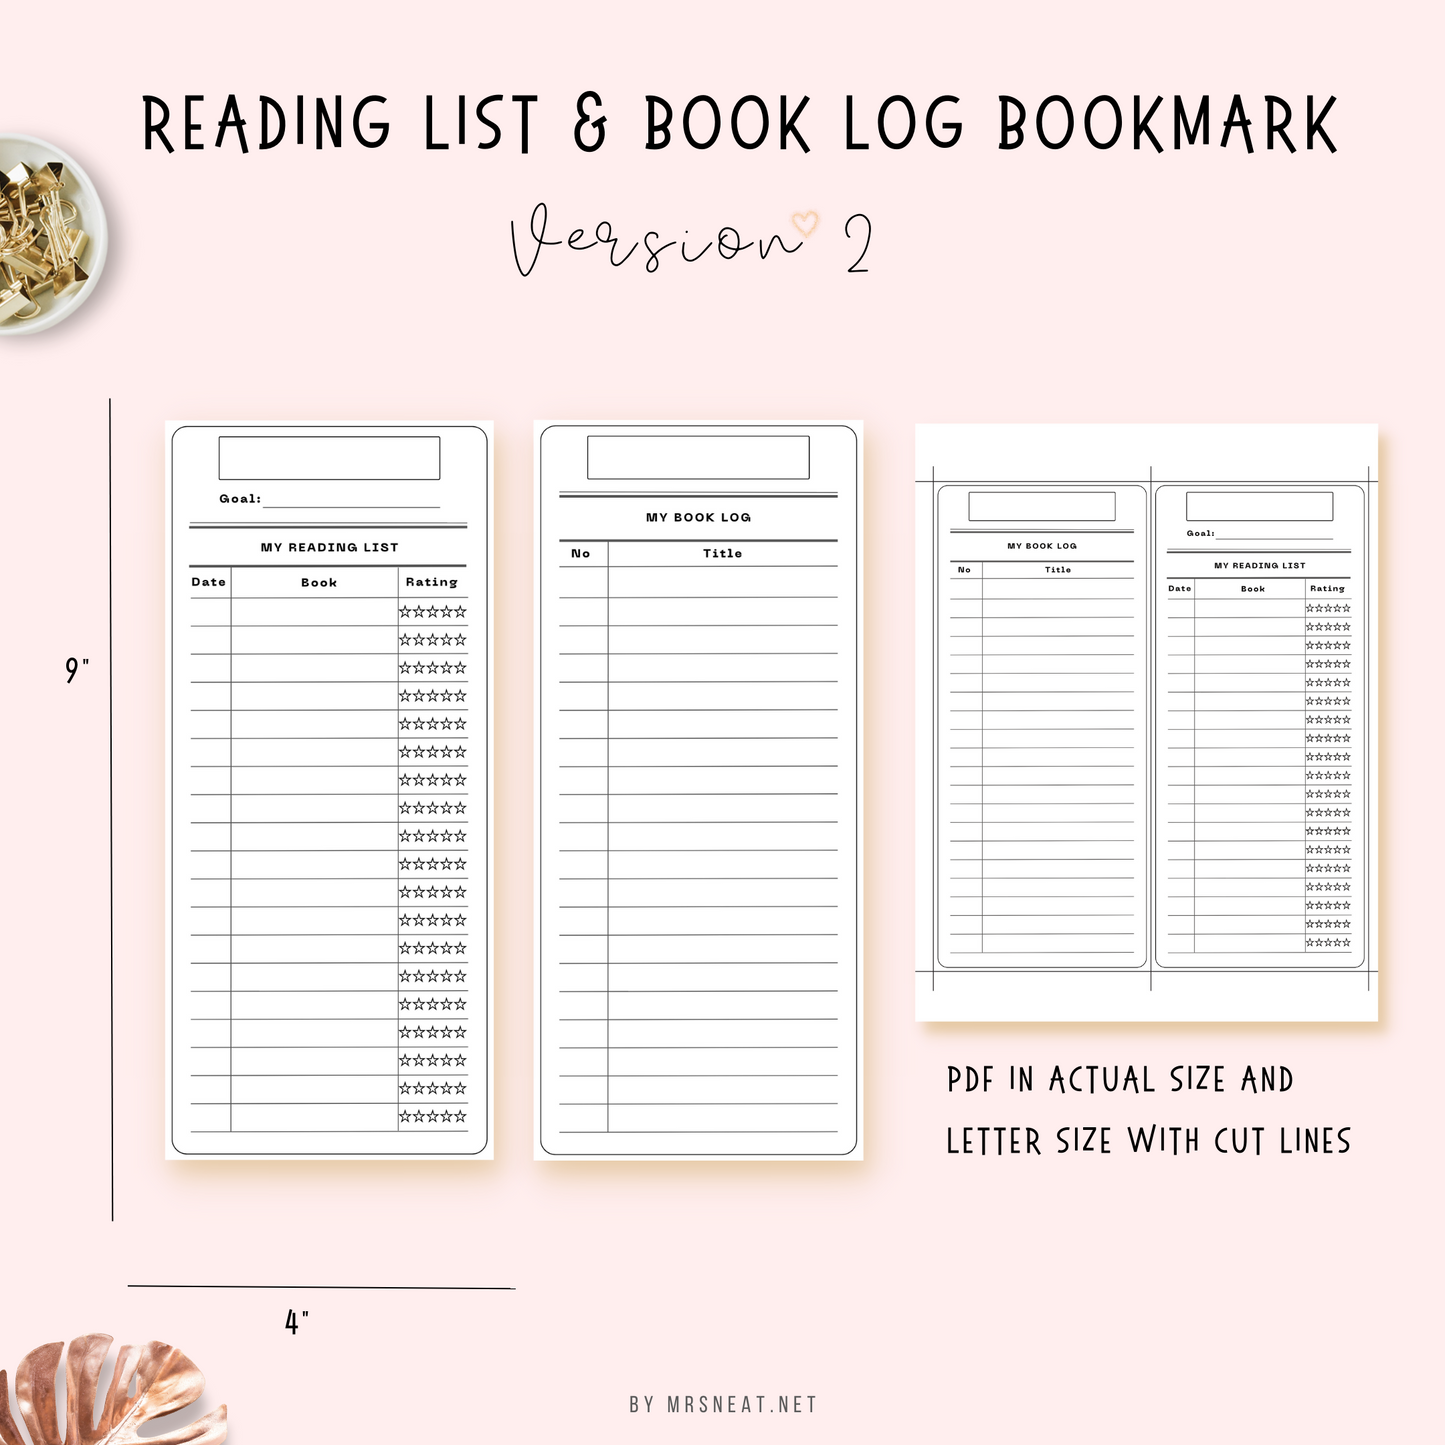 Beautiful and clean reading list and book log bookmark in minimalist design on actual size and letter size with cut lines